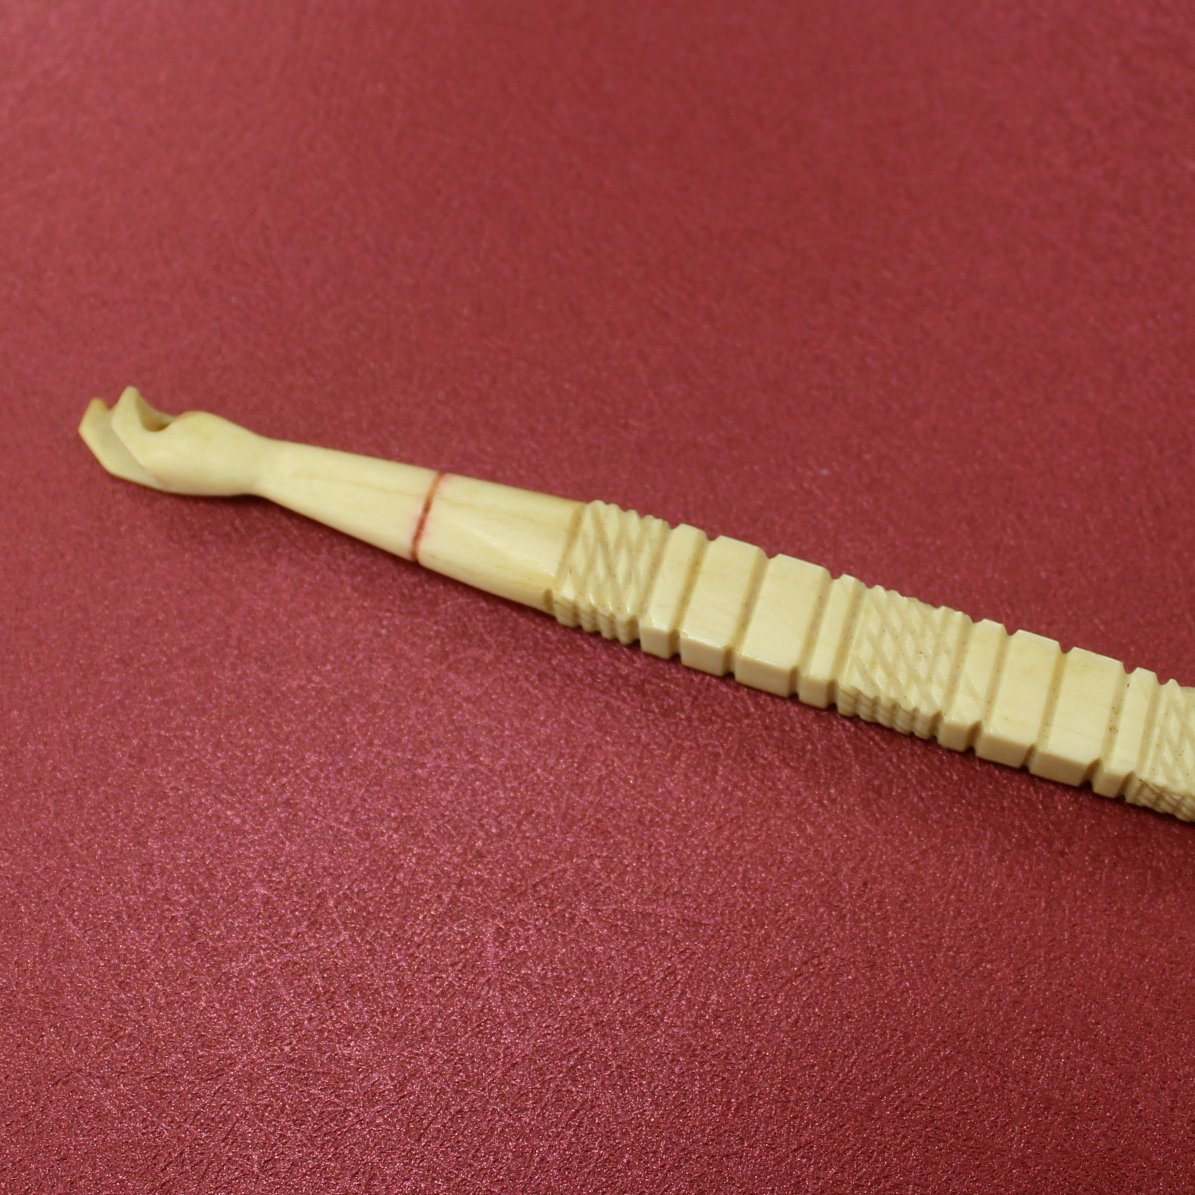 Exquisite Collectible Antique Bone Ivory Crochet Hook Carved Hand Top Decorated Handle opposite side view